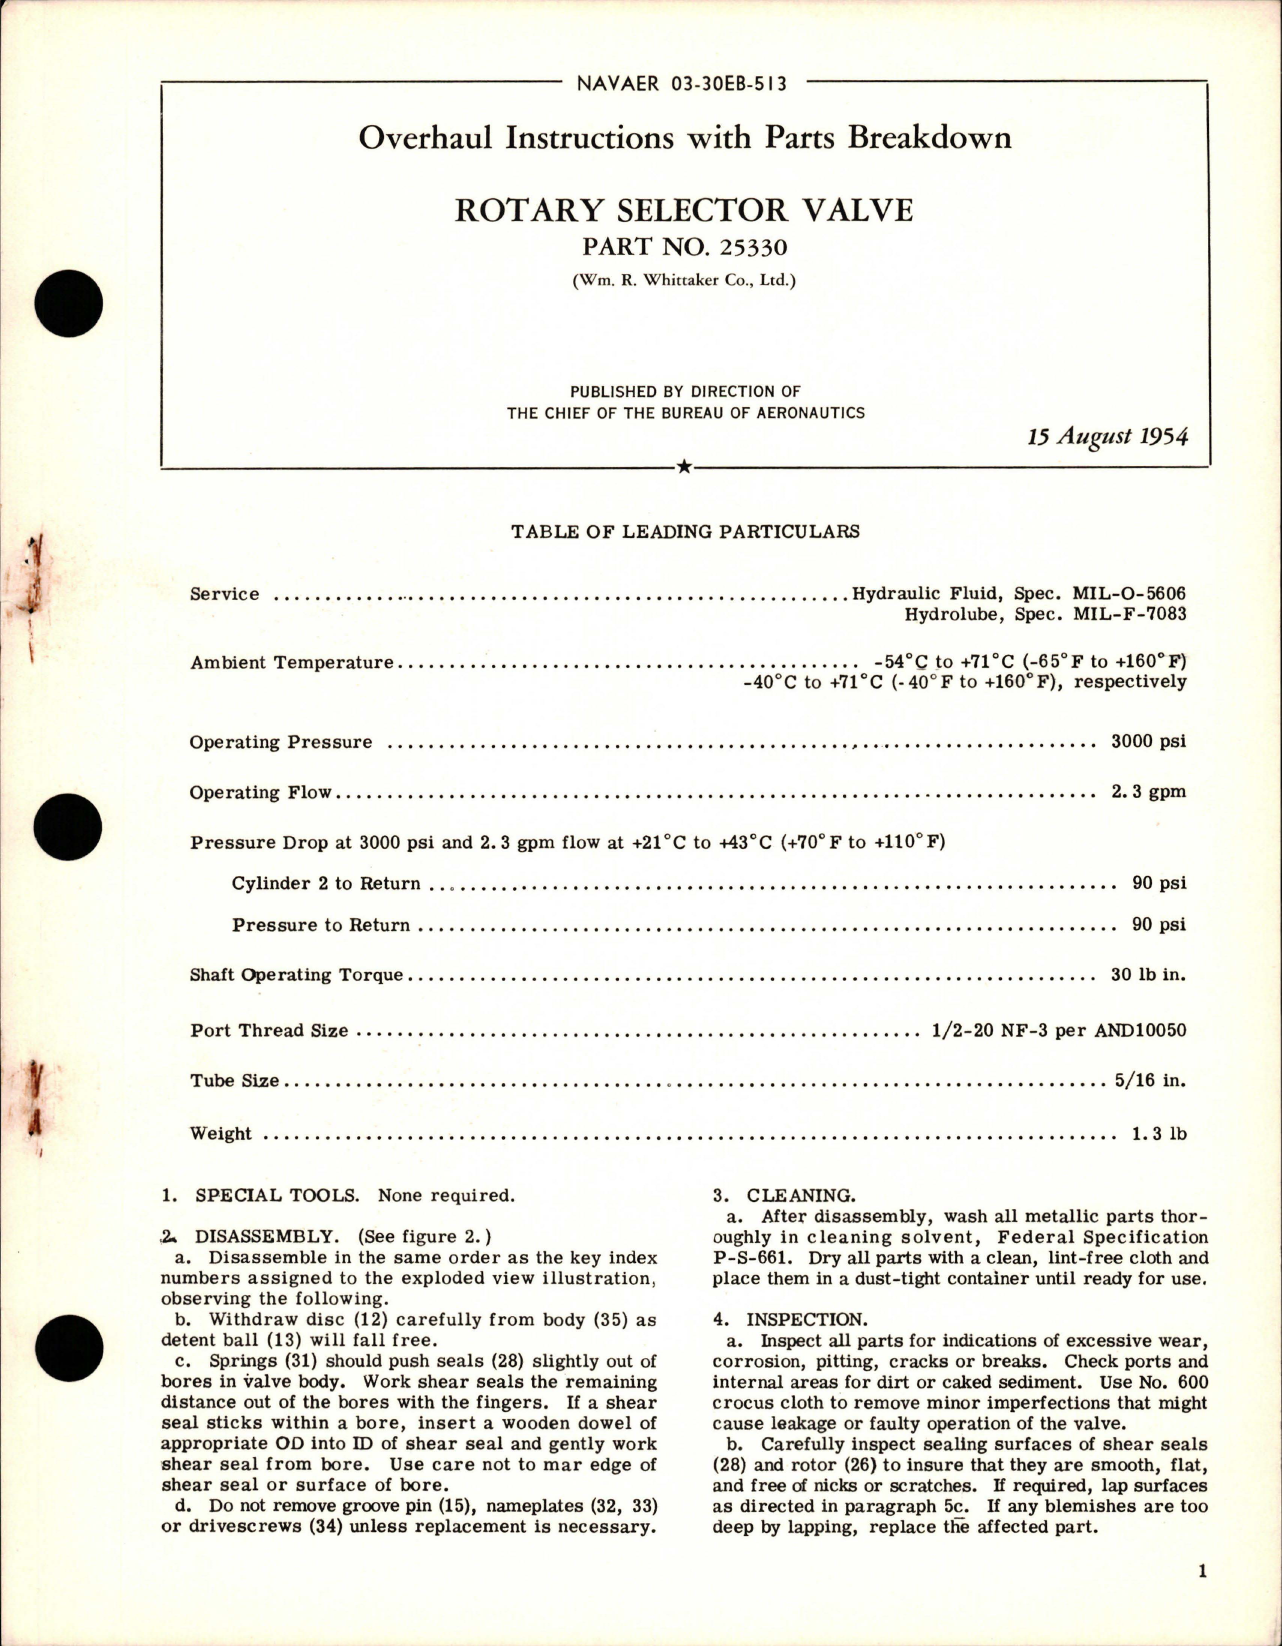 Sample page 1 from AirCorps Library document: Overhaul Instructions with Parts Breakdown for Rotary Selector Valve - Part 25330